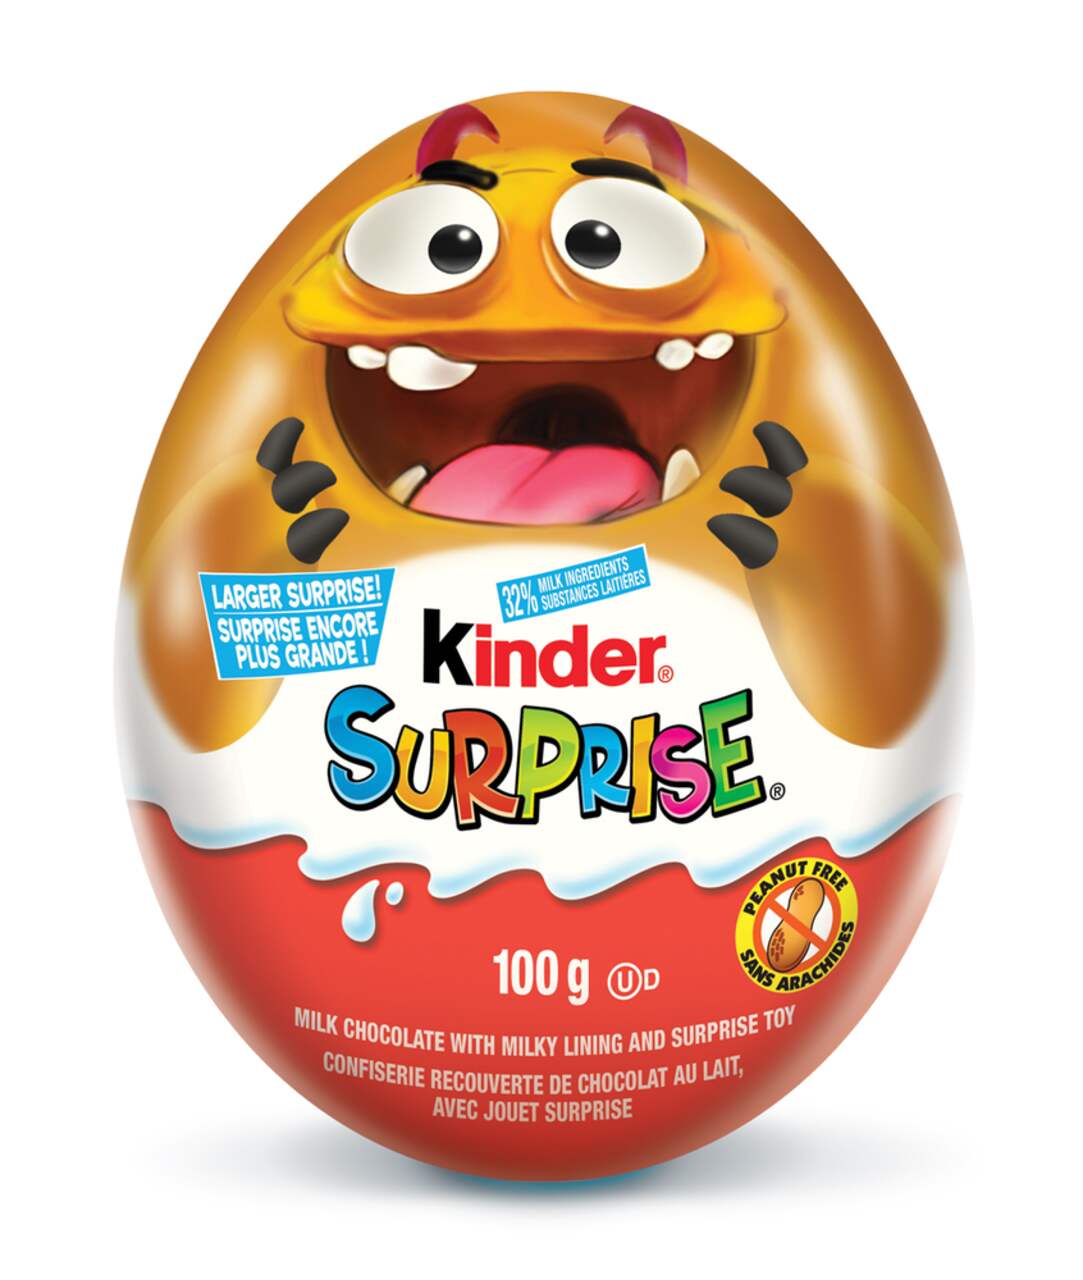 https://media-www.canadiantire.ca/product/living/food-drink/party-city-seasonal-food-drink/8527770/kinder-monster-egg-100g-26dc8054-4c28-403a-83a4-66895381eb37.png?imdensity=1&imwidth=640&impolicy=mZoom